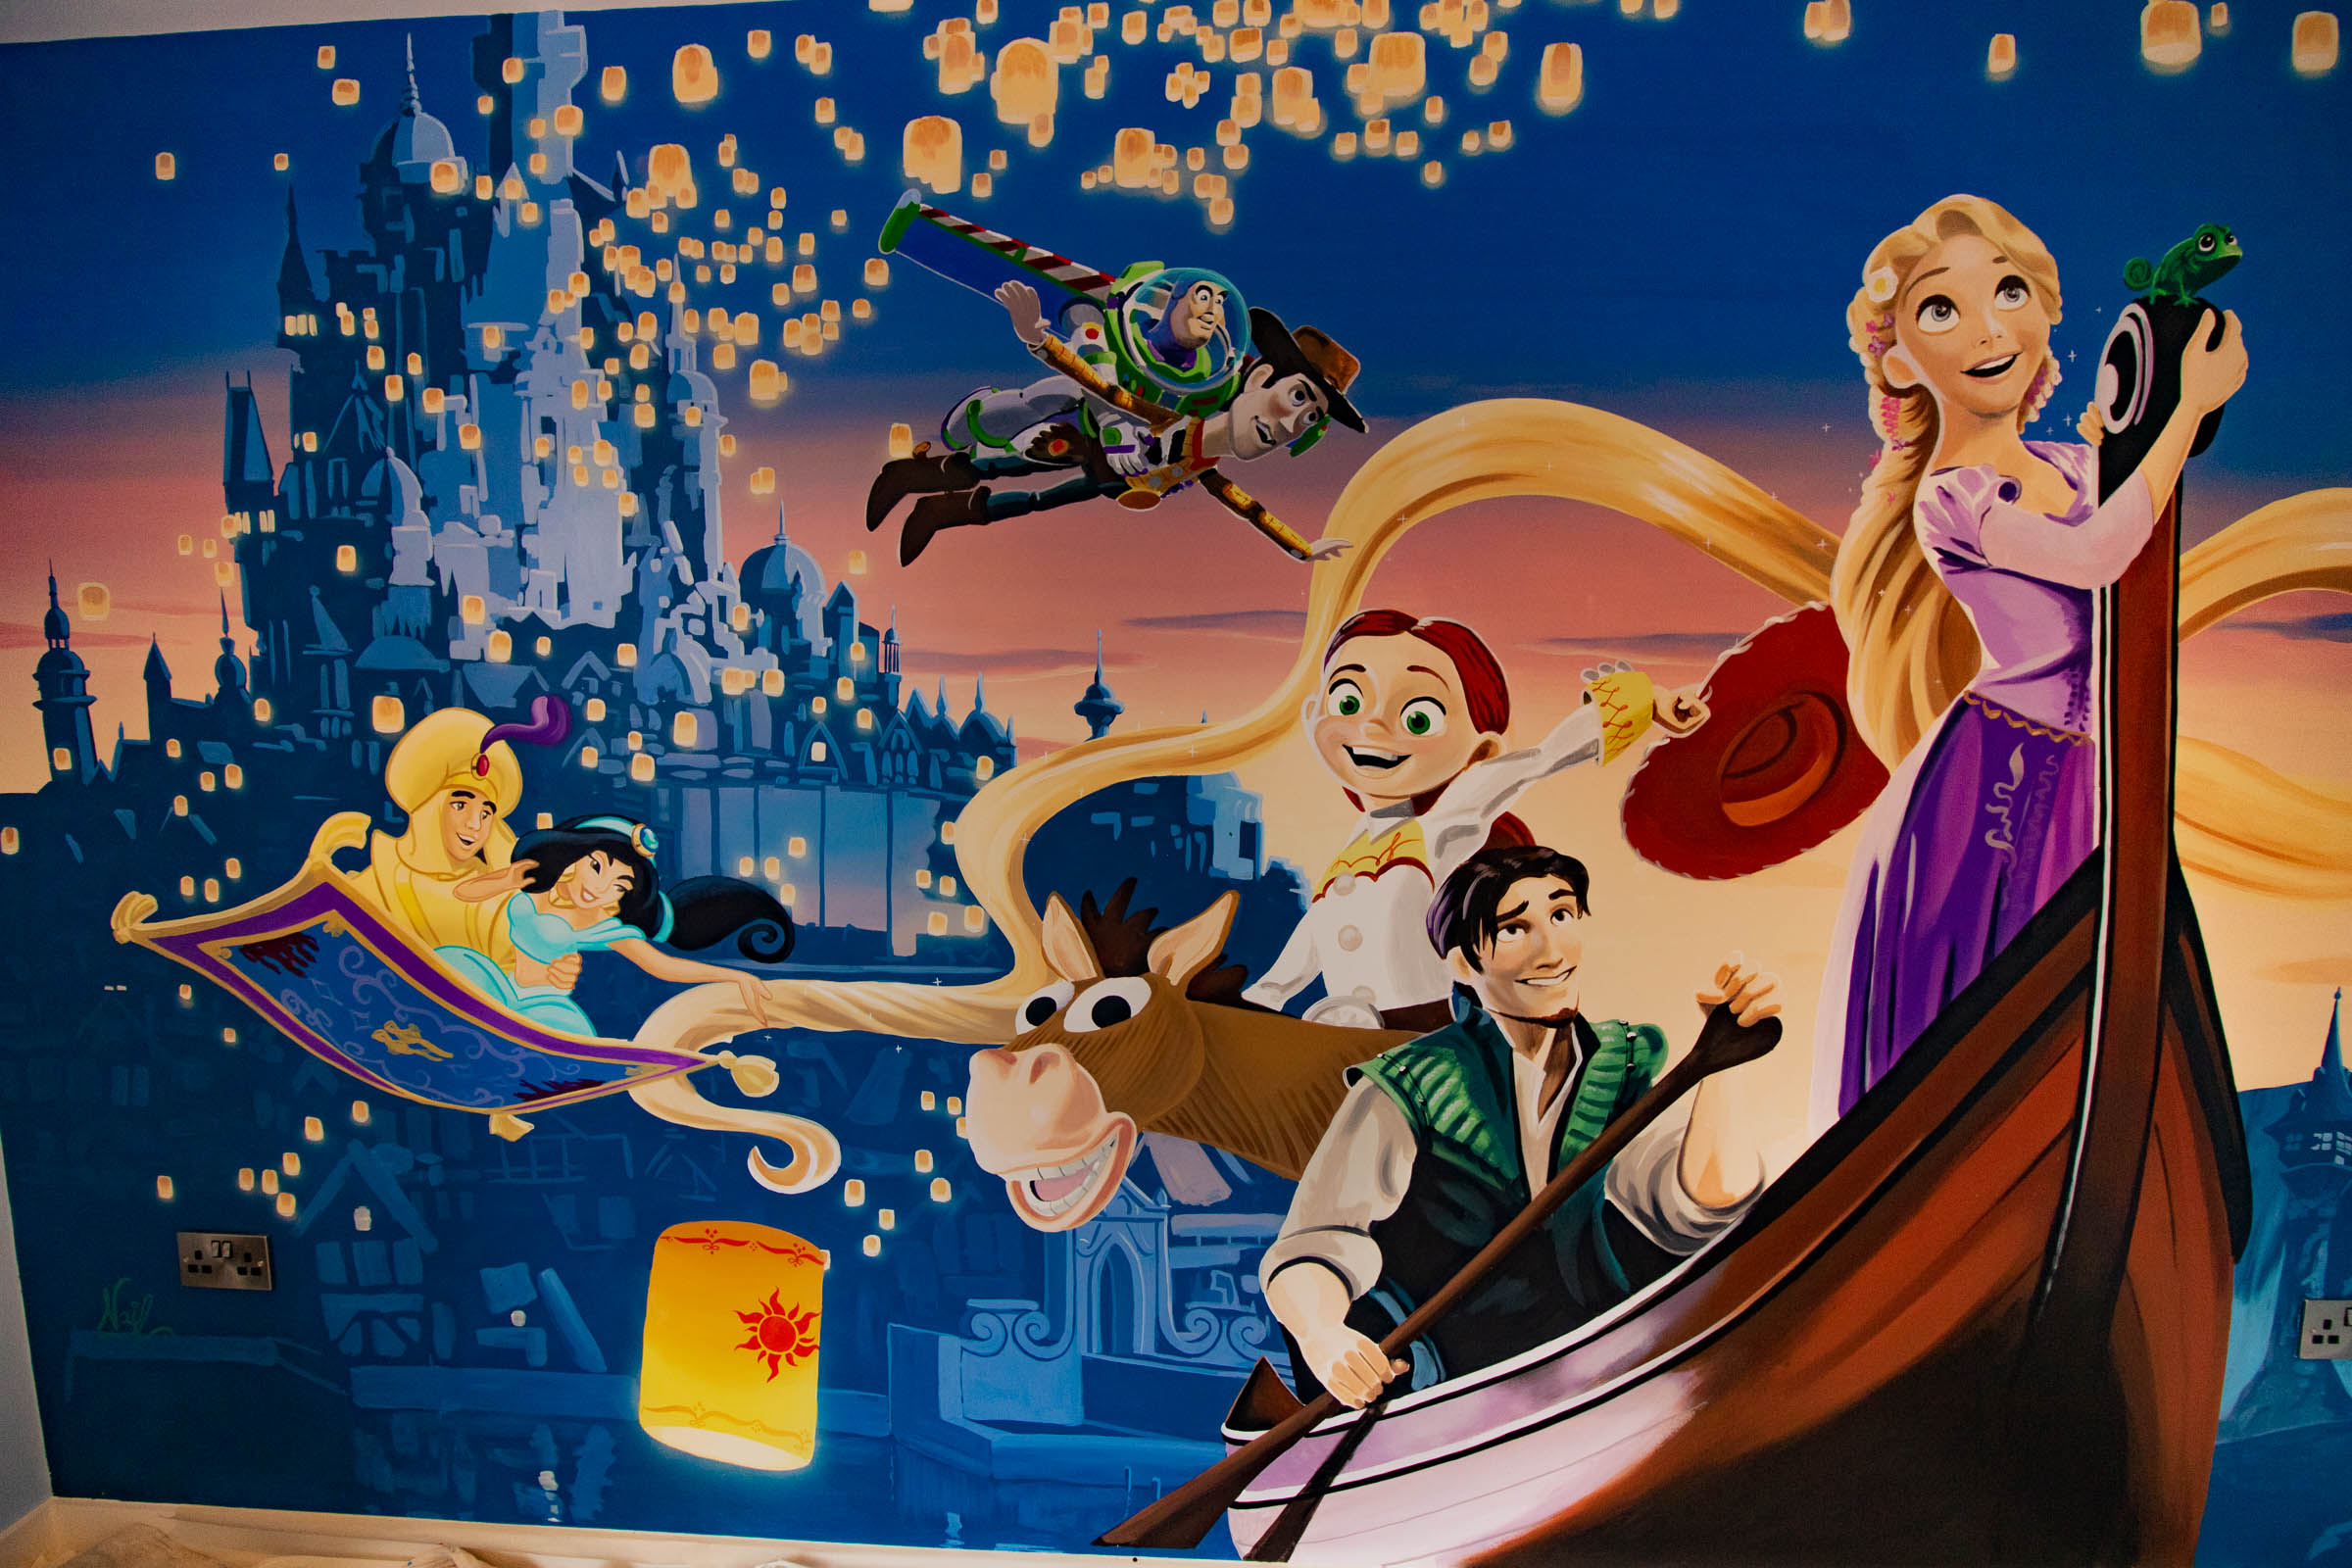 Tangled Mural featuring the clients' chosen Disney characters placed into the Chinese lantern scene